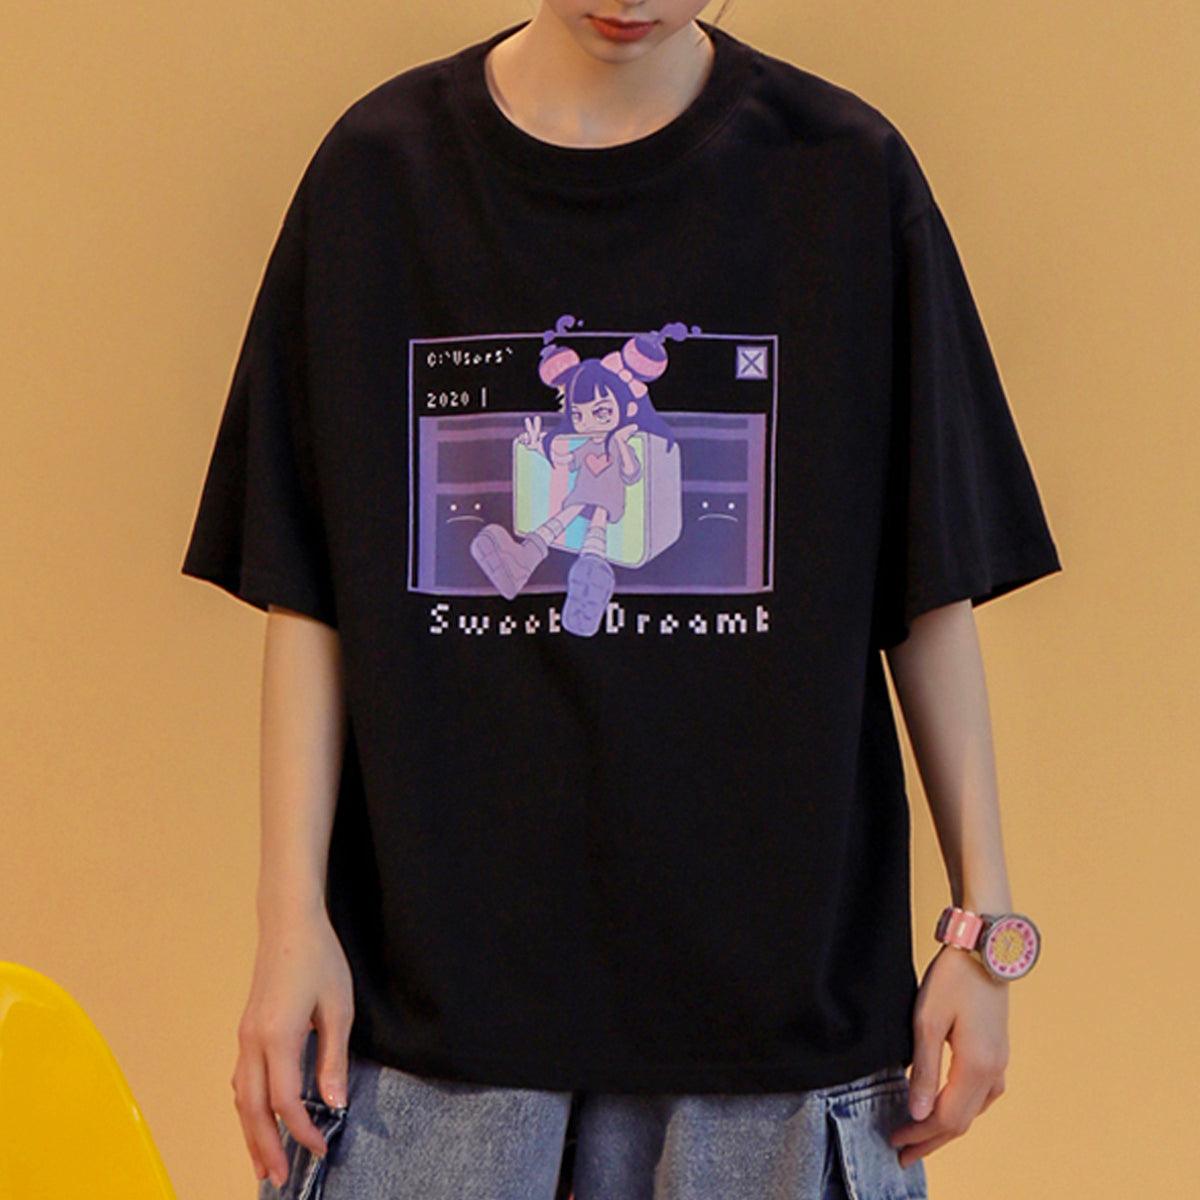 Old Web Anime Girl Hacker T-Shirt - Aesthetic Clothes Shop